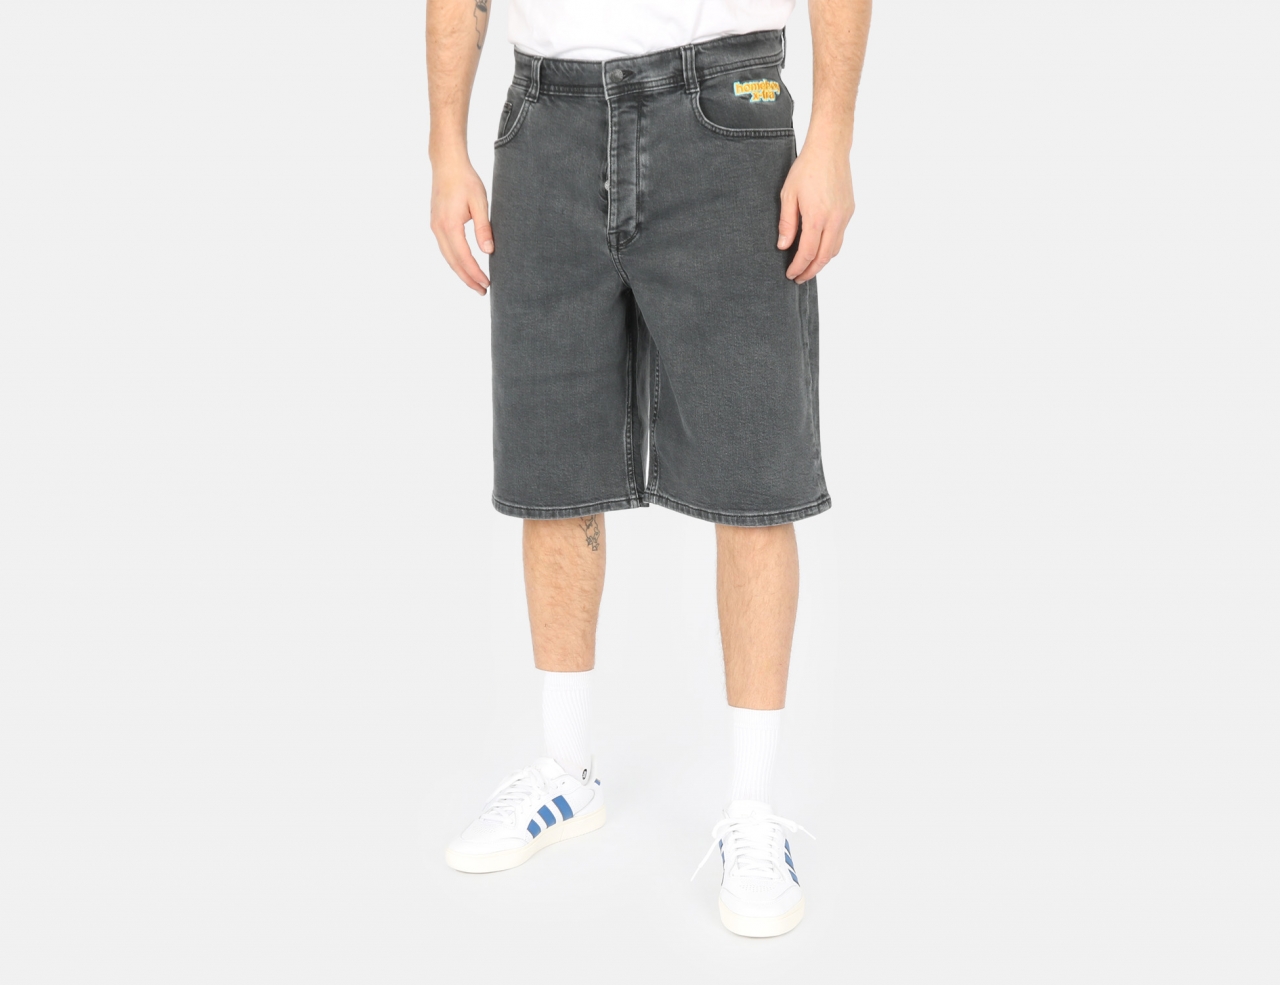 Homeboy x-tra Monster Shorts - Washed Grey